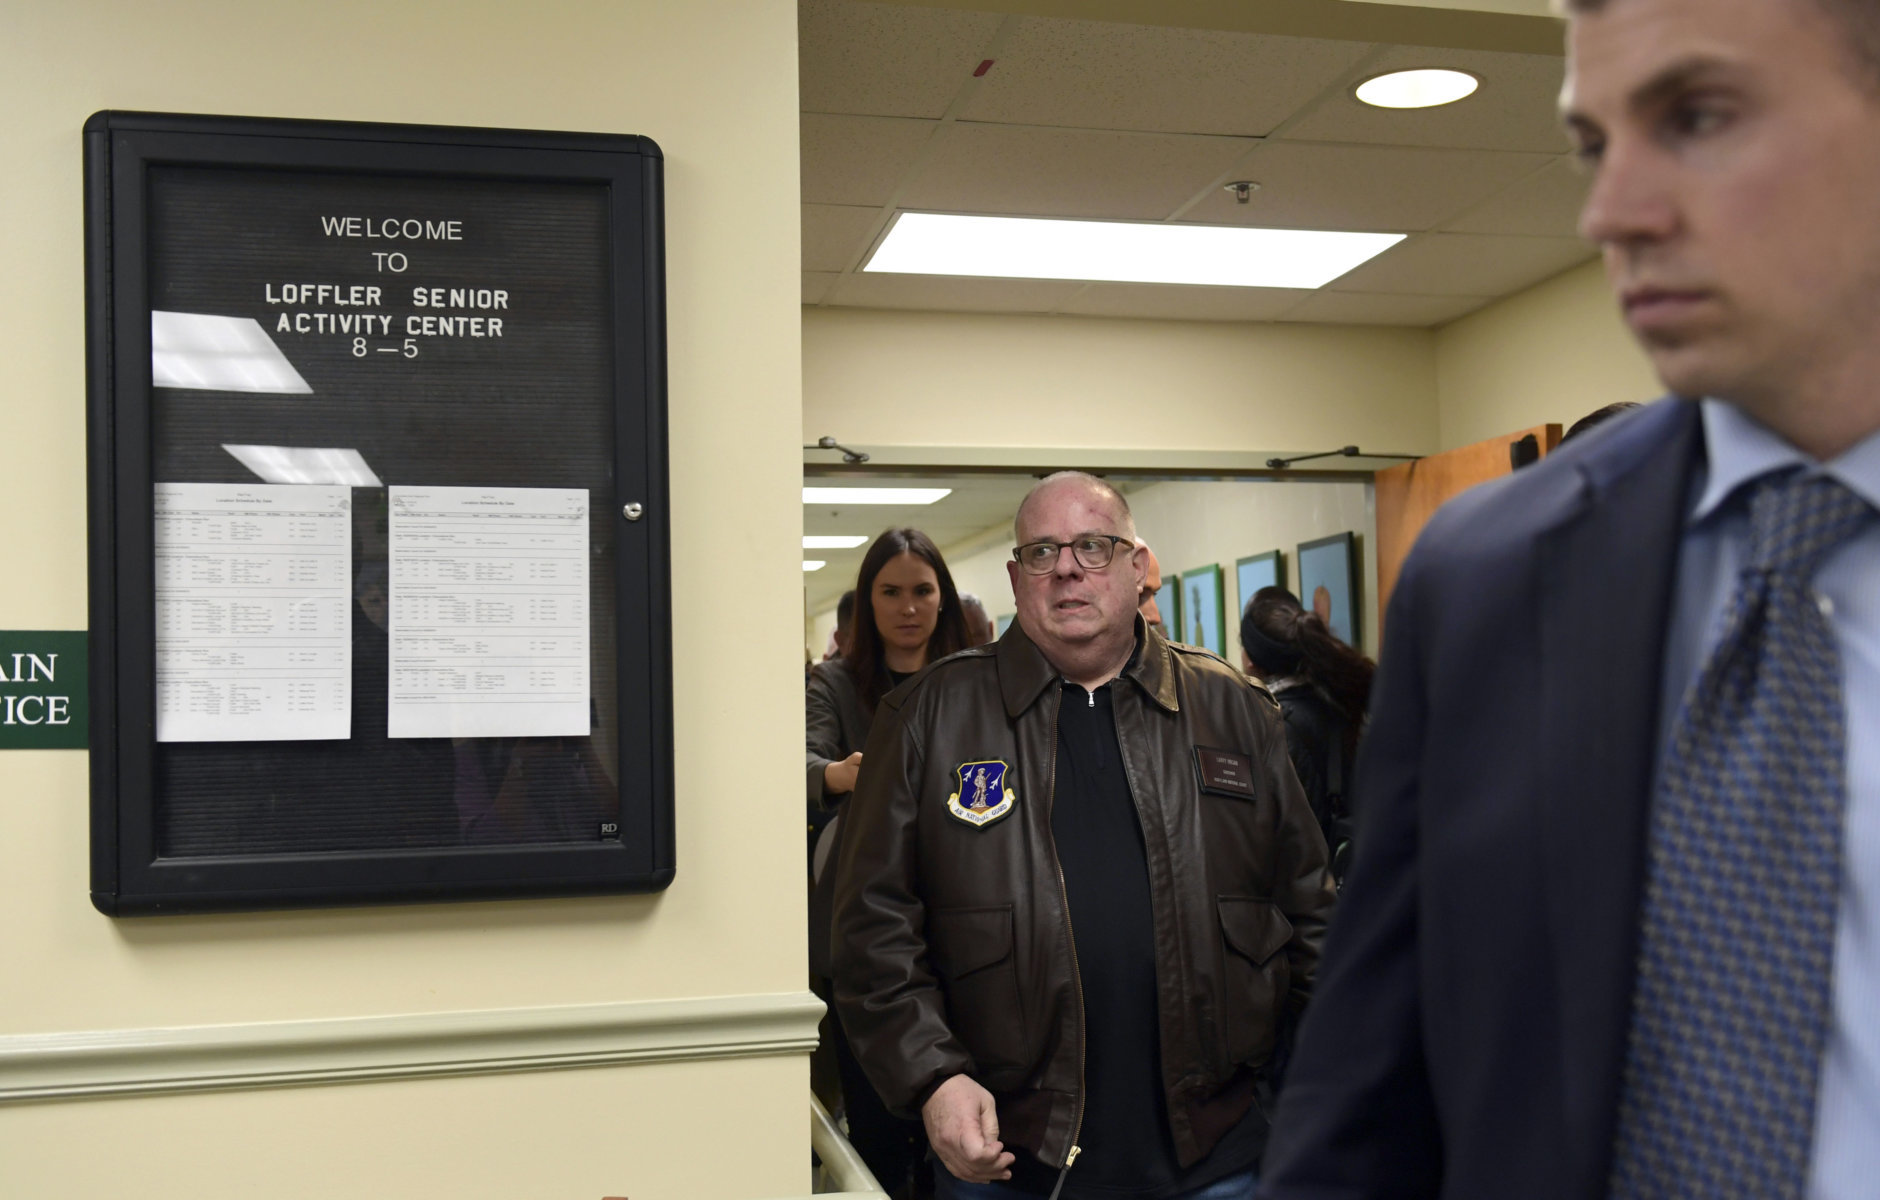 Maryland Gov. Larry Hogan walks out of Loffler Senior Center, in Great Mills., Md., following a news conference, Tuesday, March 20, 2018, on the shooting at Great Mills High School. (AP Photo/Susan Walsh)